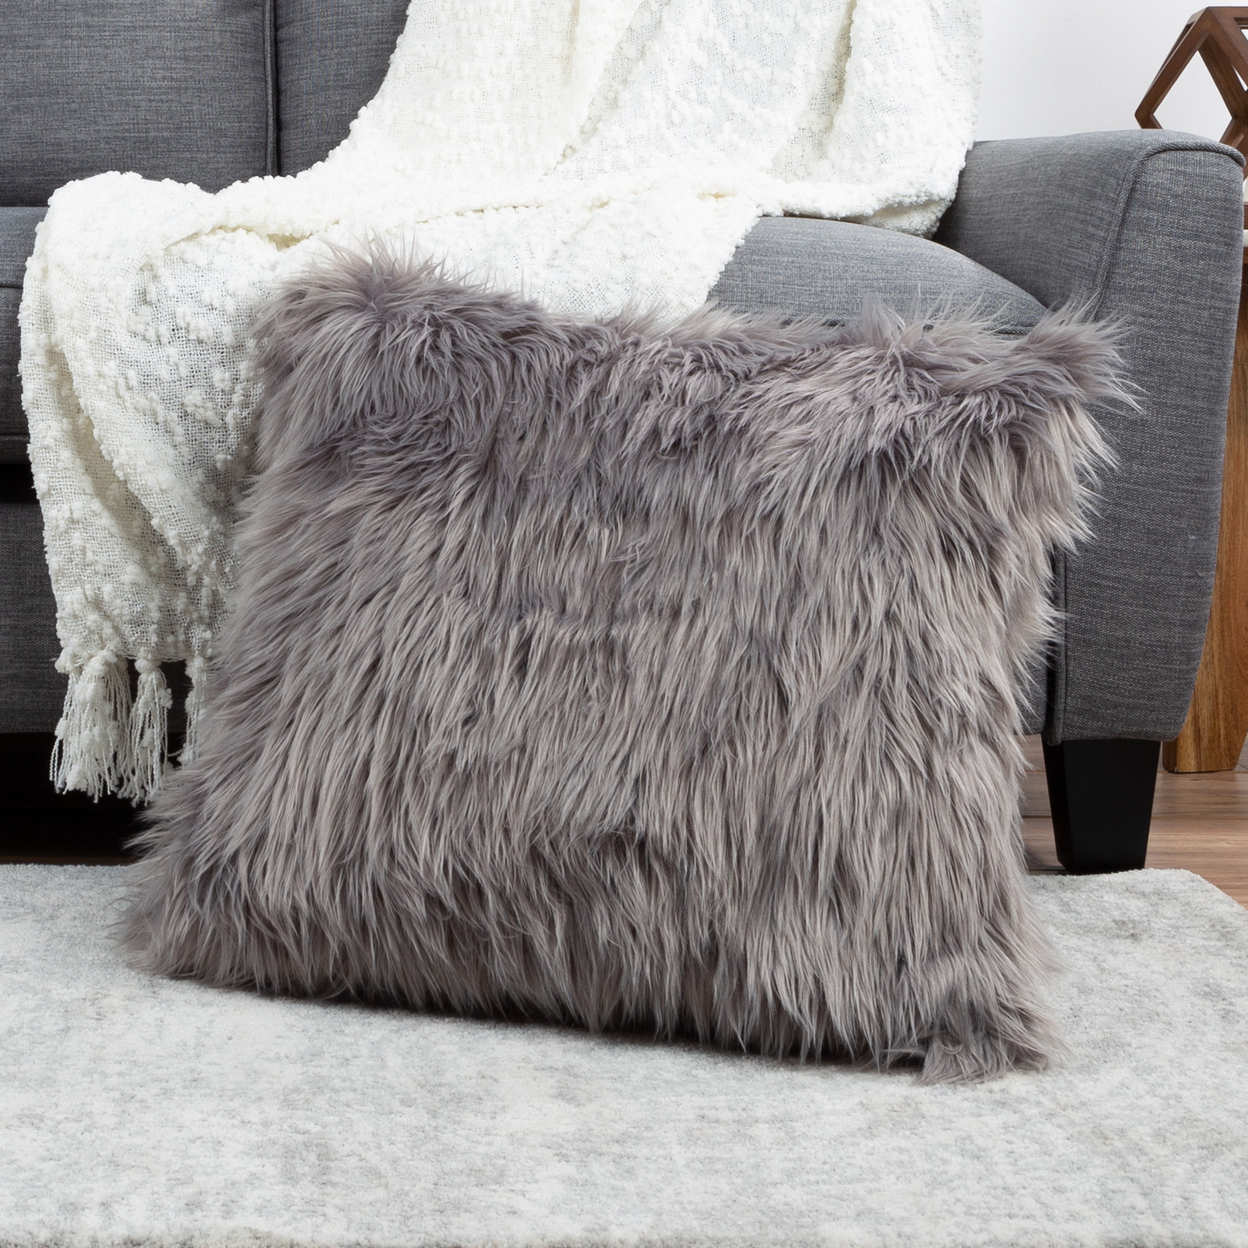 22 Inch Himalayan Faux Fur Square Thick Throw Accent Pillow Removable Cover XL - Gray